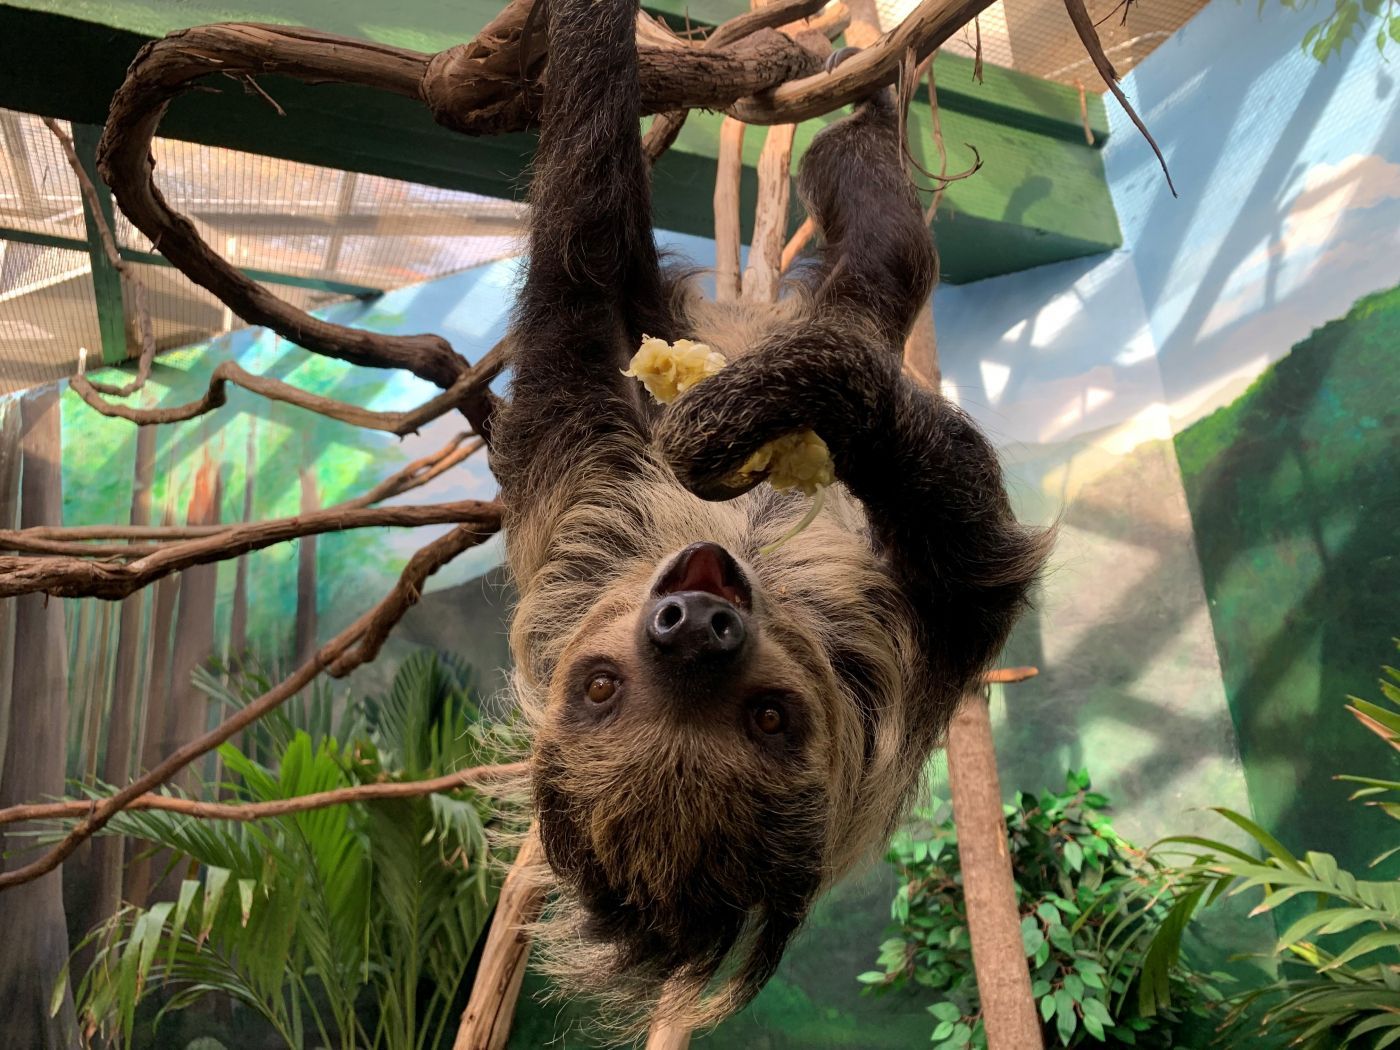 Will Love Bloom Between Two Sloths at the National Zoo?. Smart